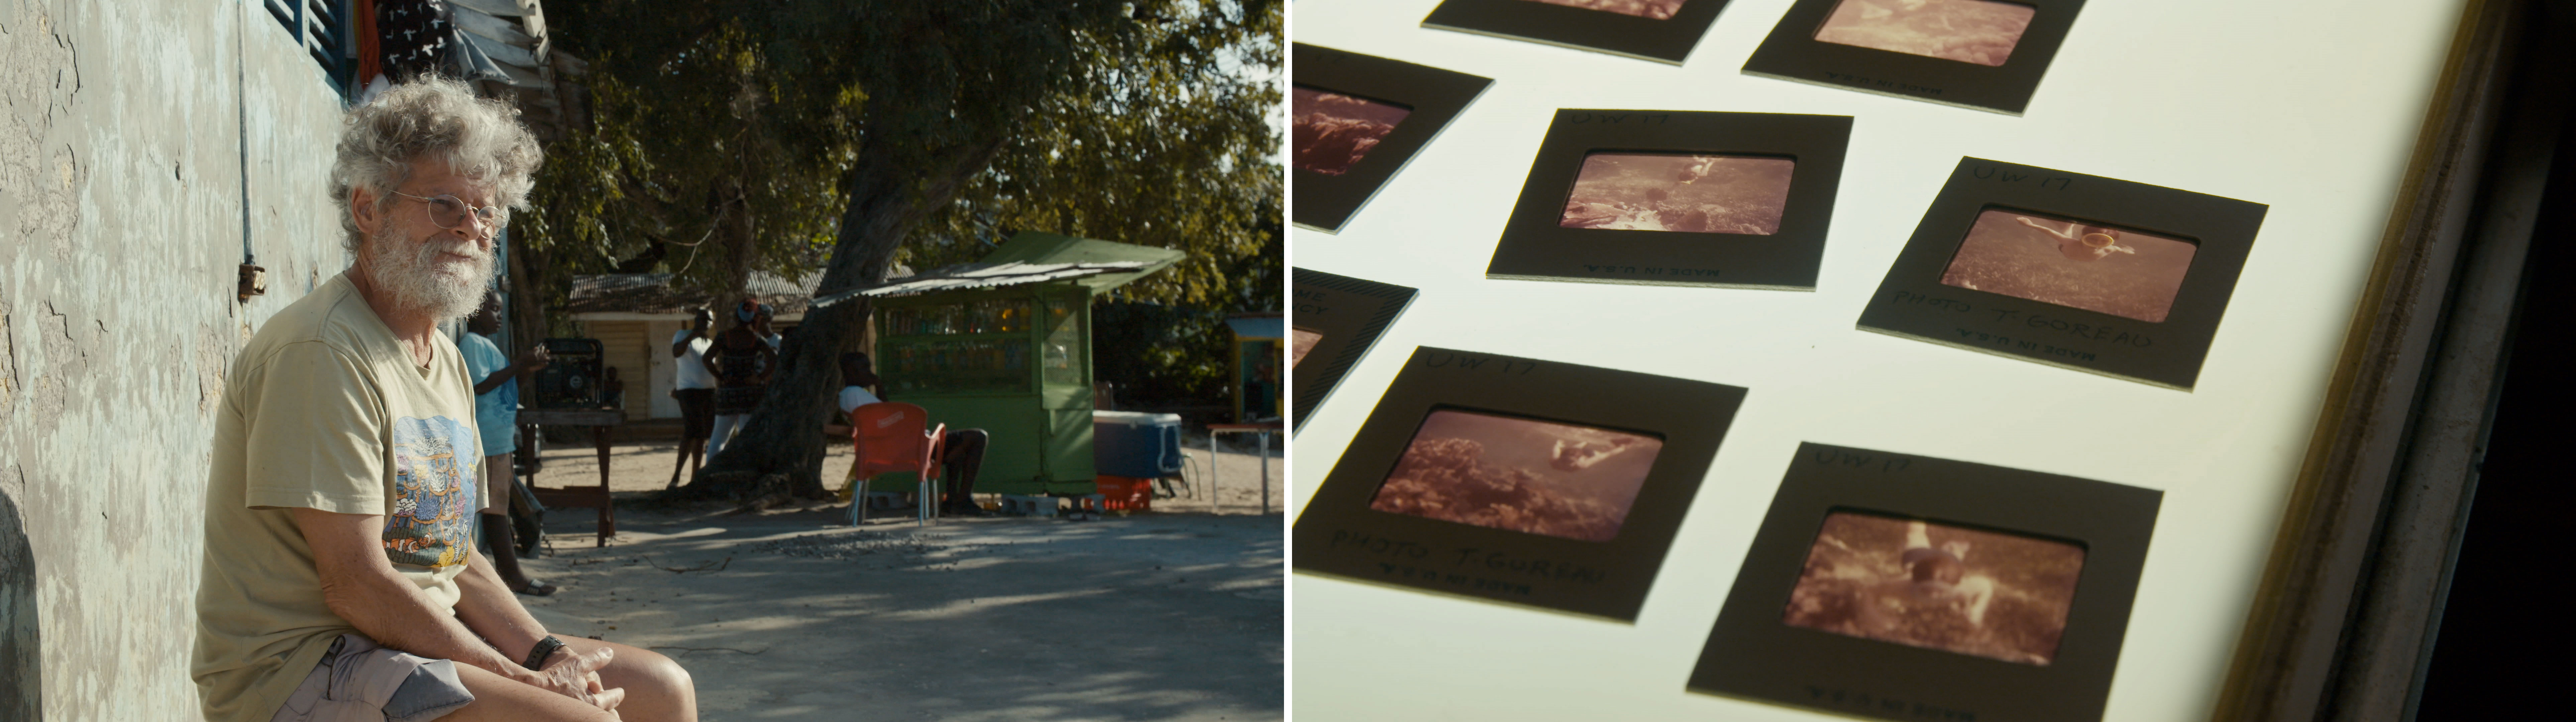 Stills from the film "Coral Ghosts" show Tom Goreau sitting on an outdoor bench and slides on a light table